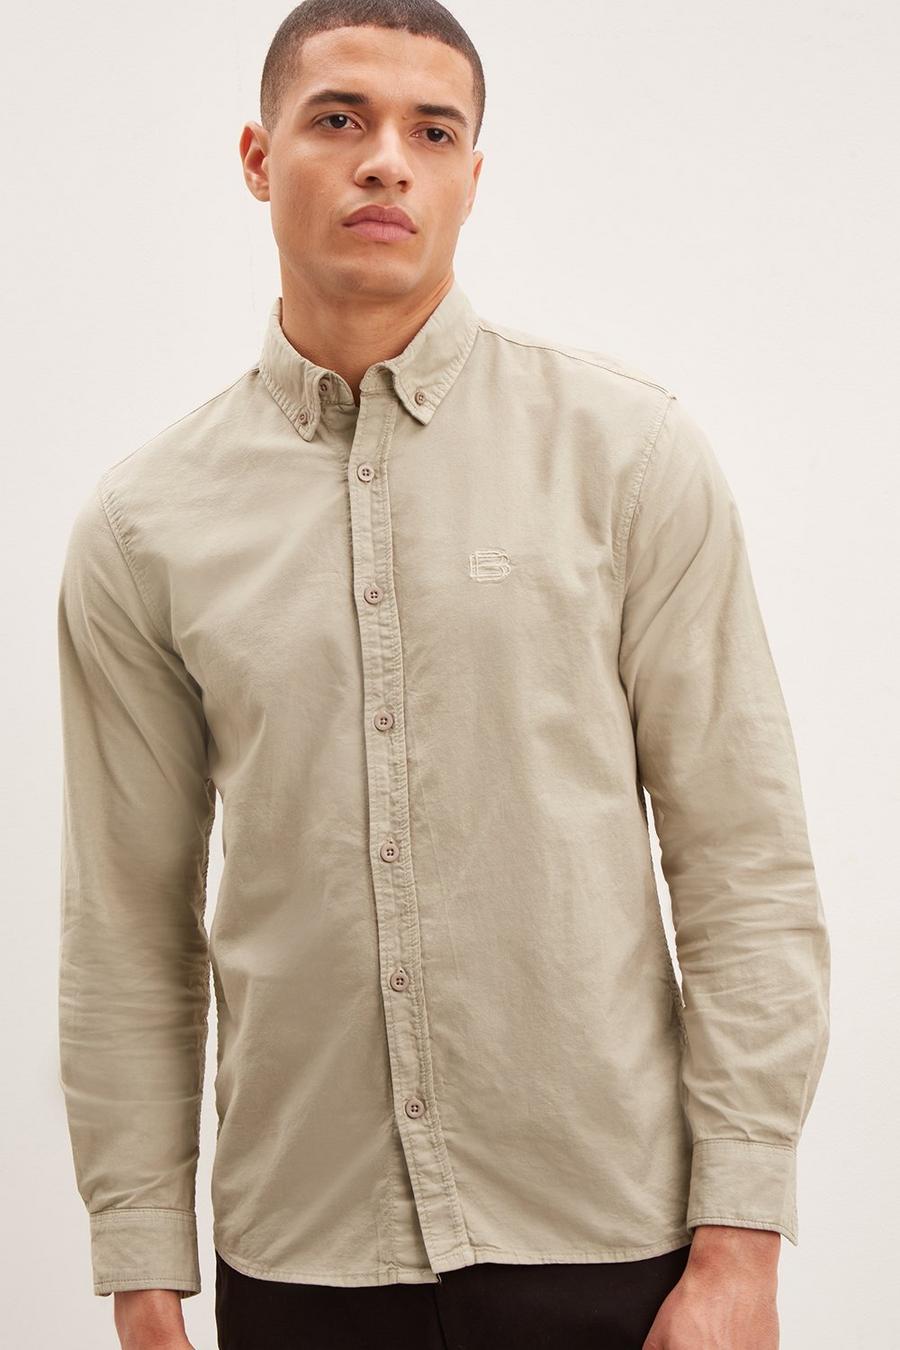 Long Sleeve Skinny Fit Garment Dyed Oxford